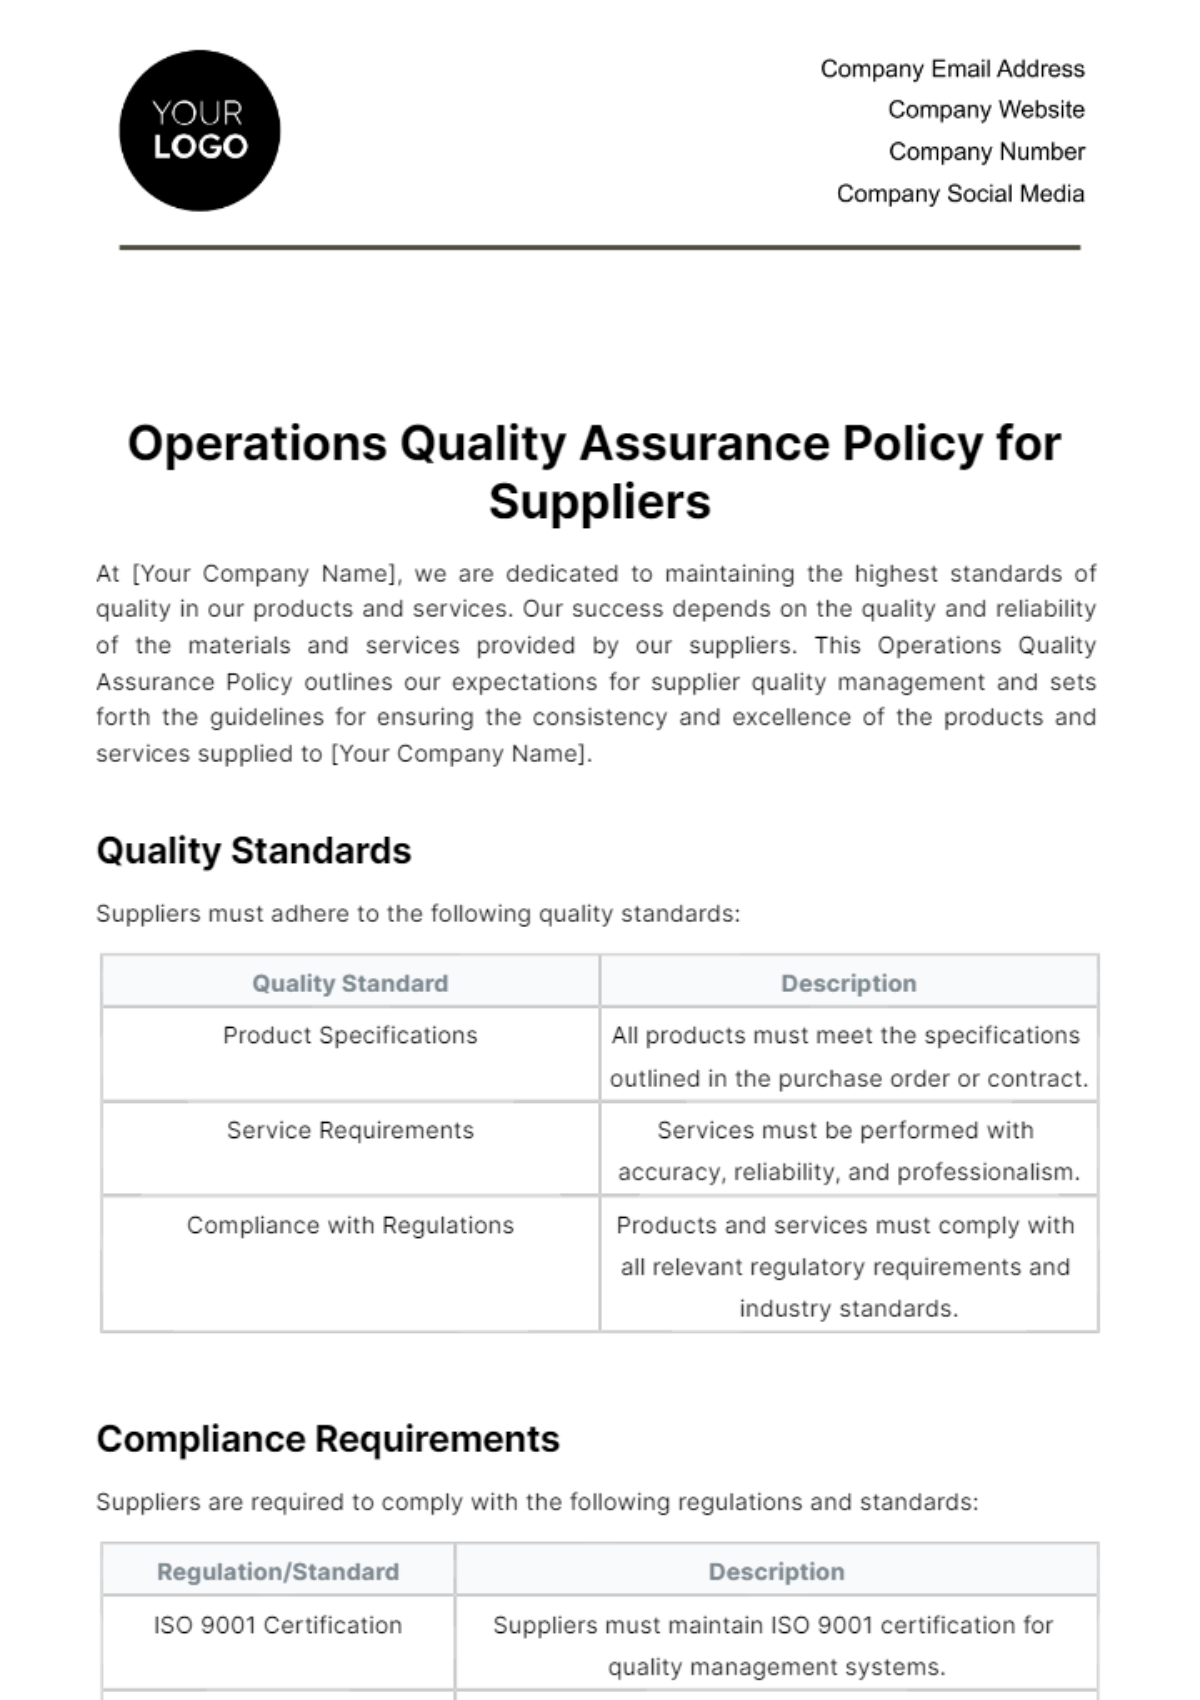 Operations Quality Assurance Policy for Suppliers Template